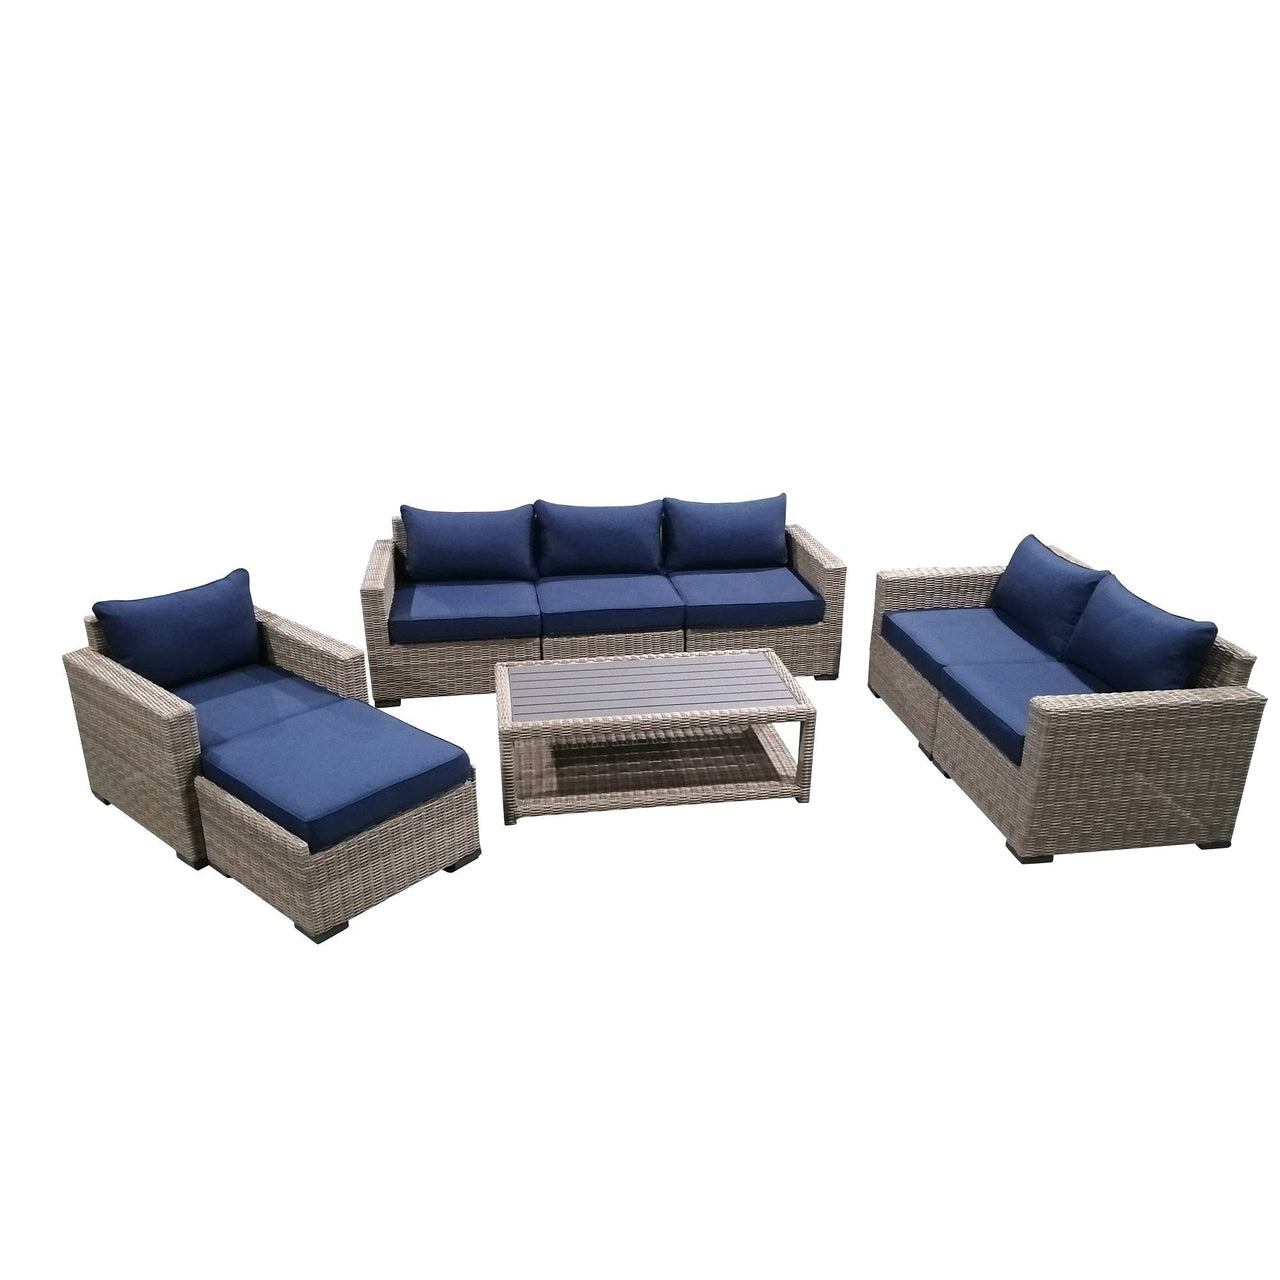 8-Piece Outdoor Pation Funiture Set Wicker Rattan Sectional Sofa Couch with Coffee Table Outdoor Furniture Casual Inc. 